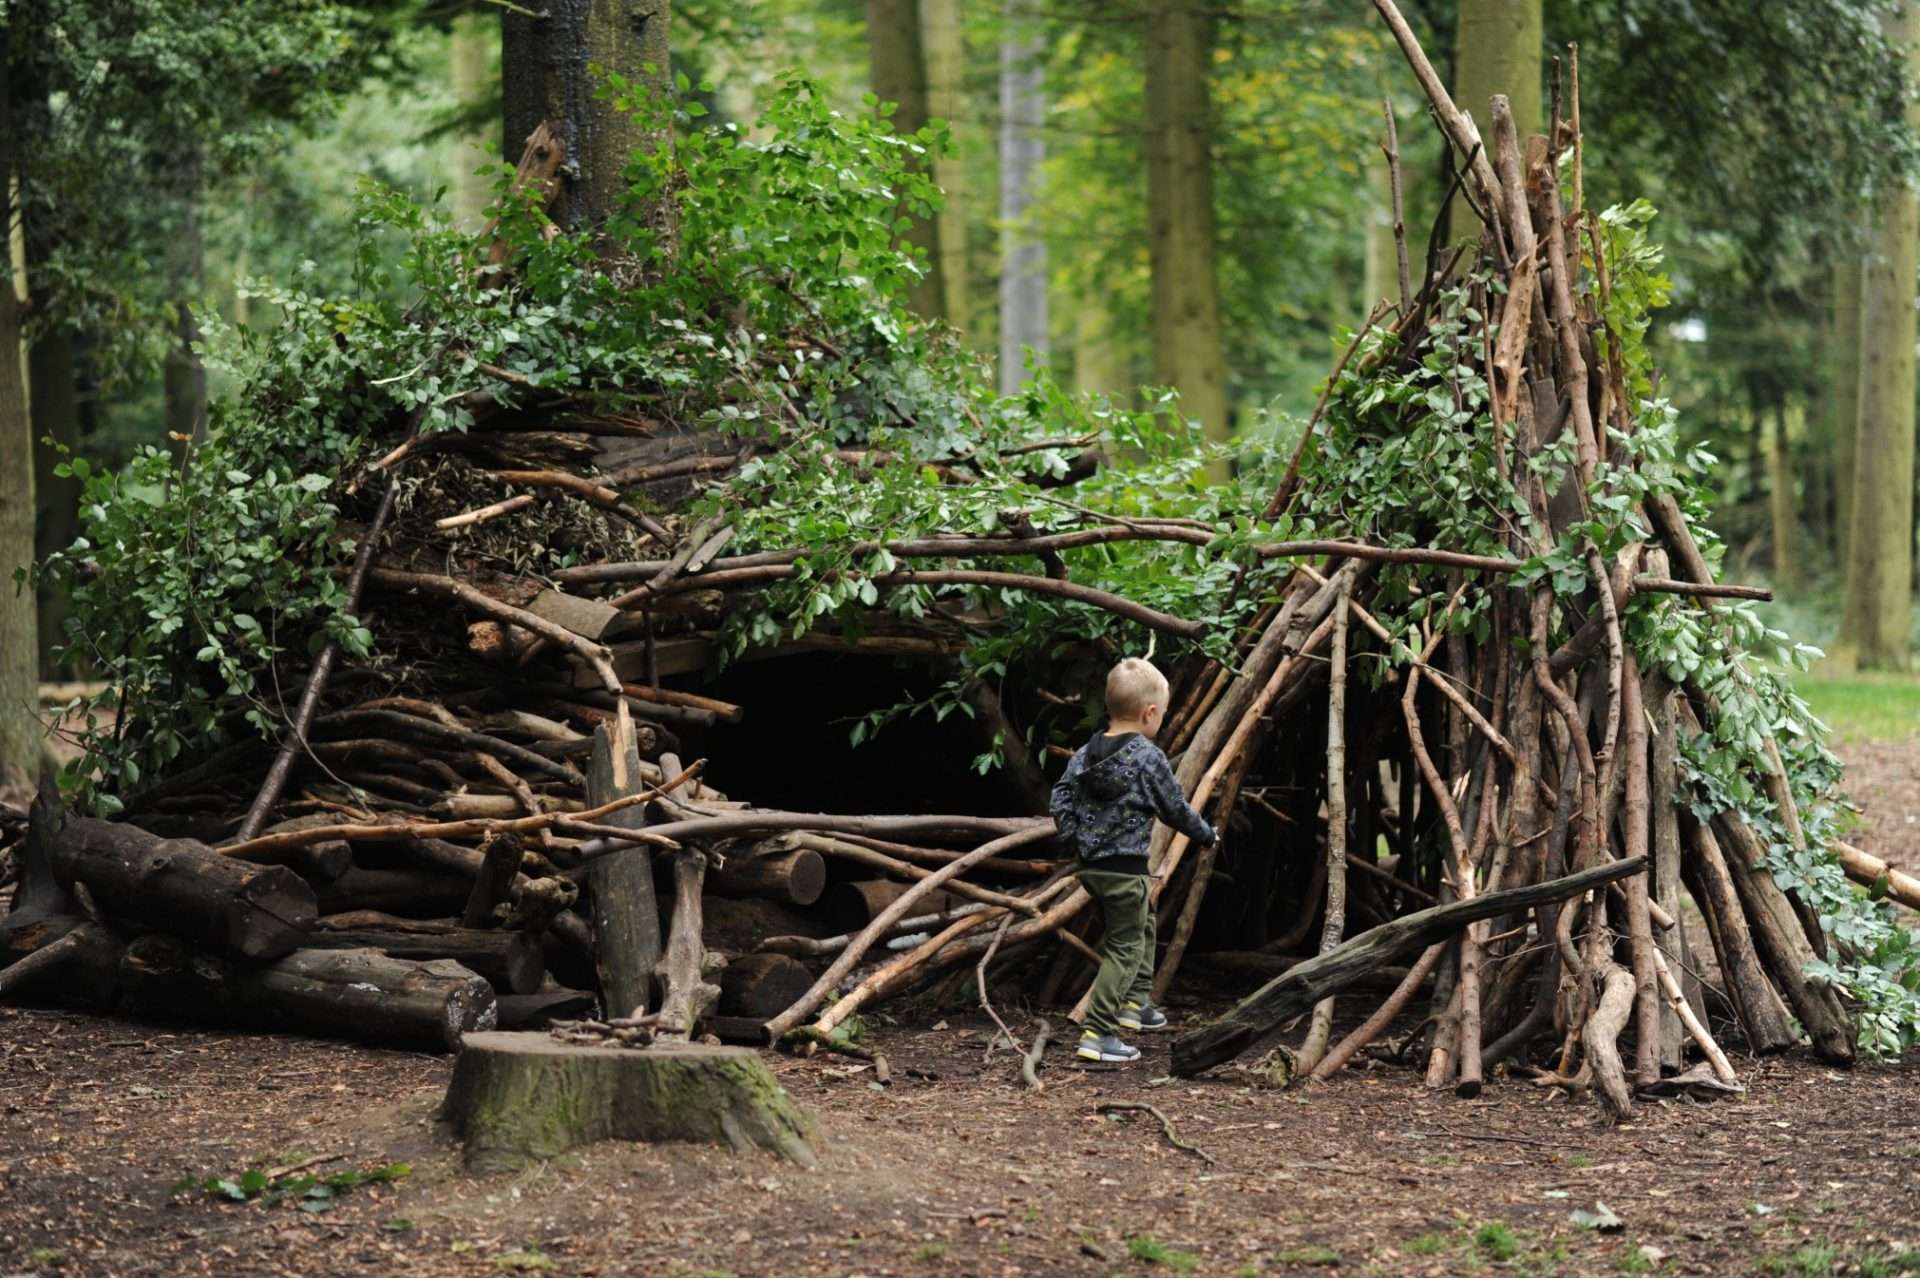 Little boy playing in man made shelter in forest